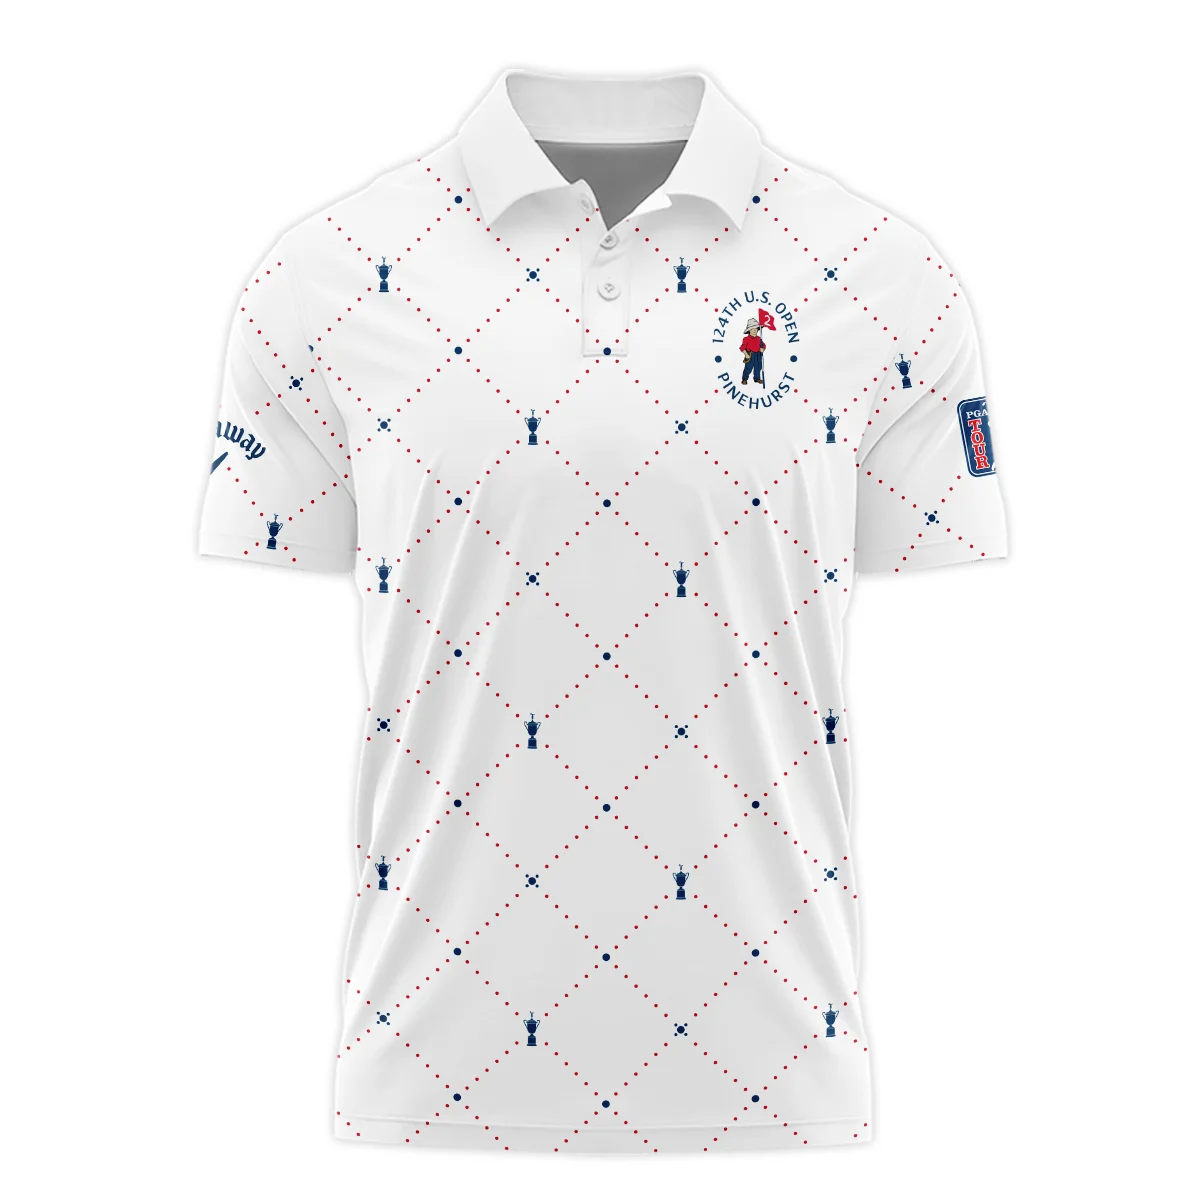 Argyle Pattern With Cup 124th U.S. Open Pinehurst Callaway Unisex T-Shirt Style Classic T-Shirt